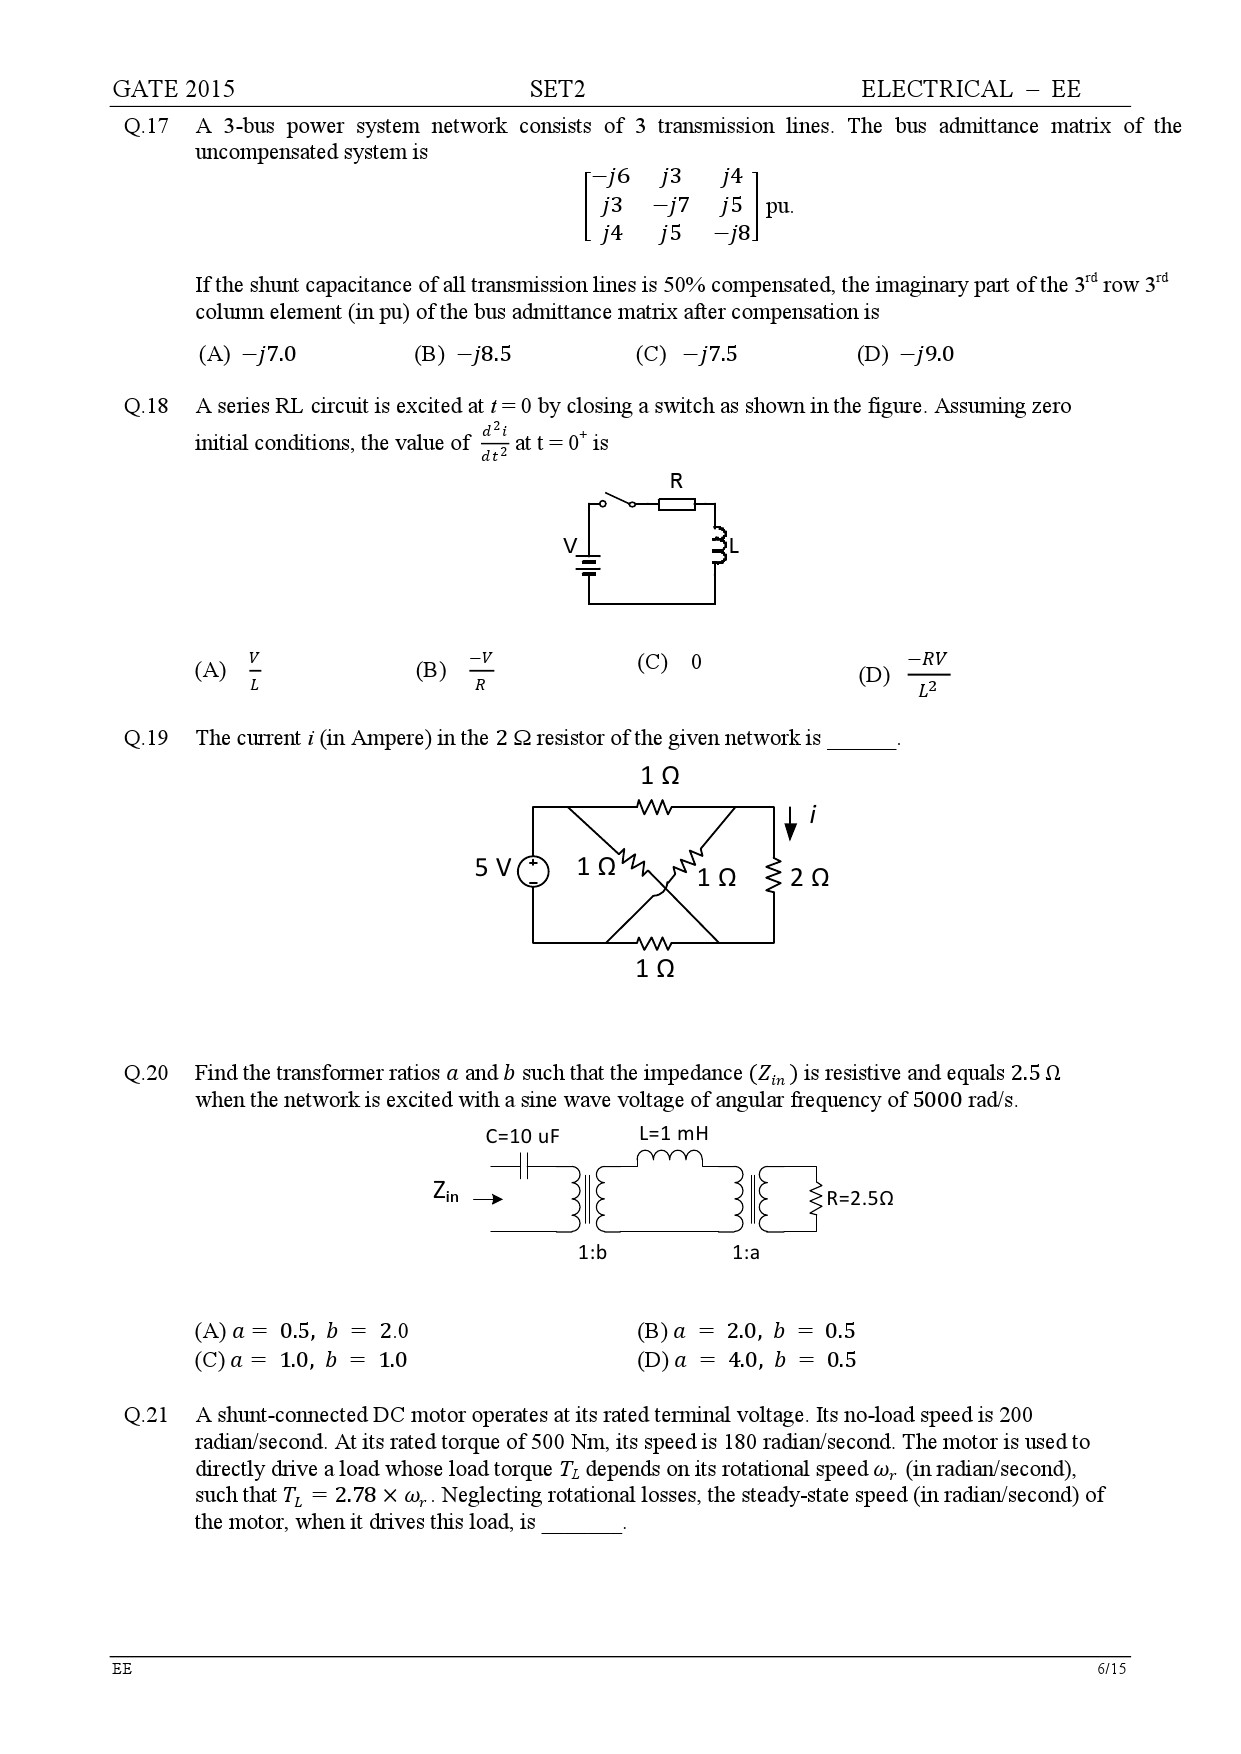 GATE Exam Question Paper 2015 Electrical Engineering Set 2 6